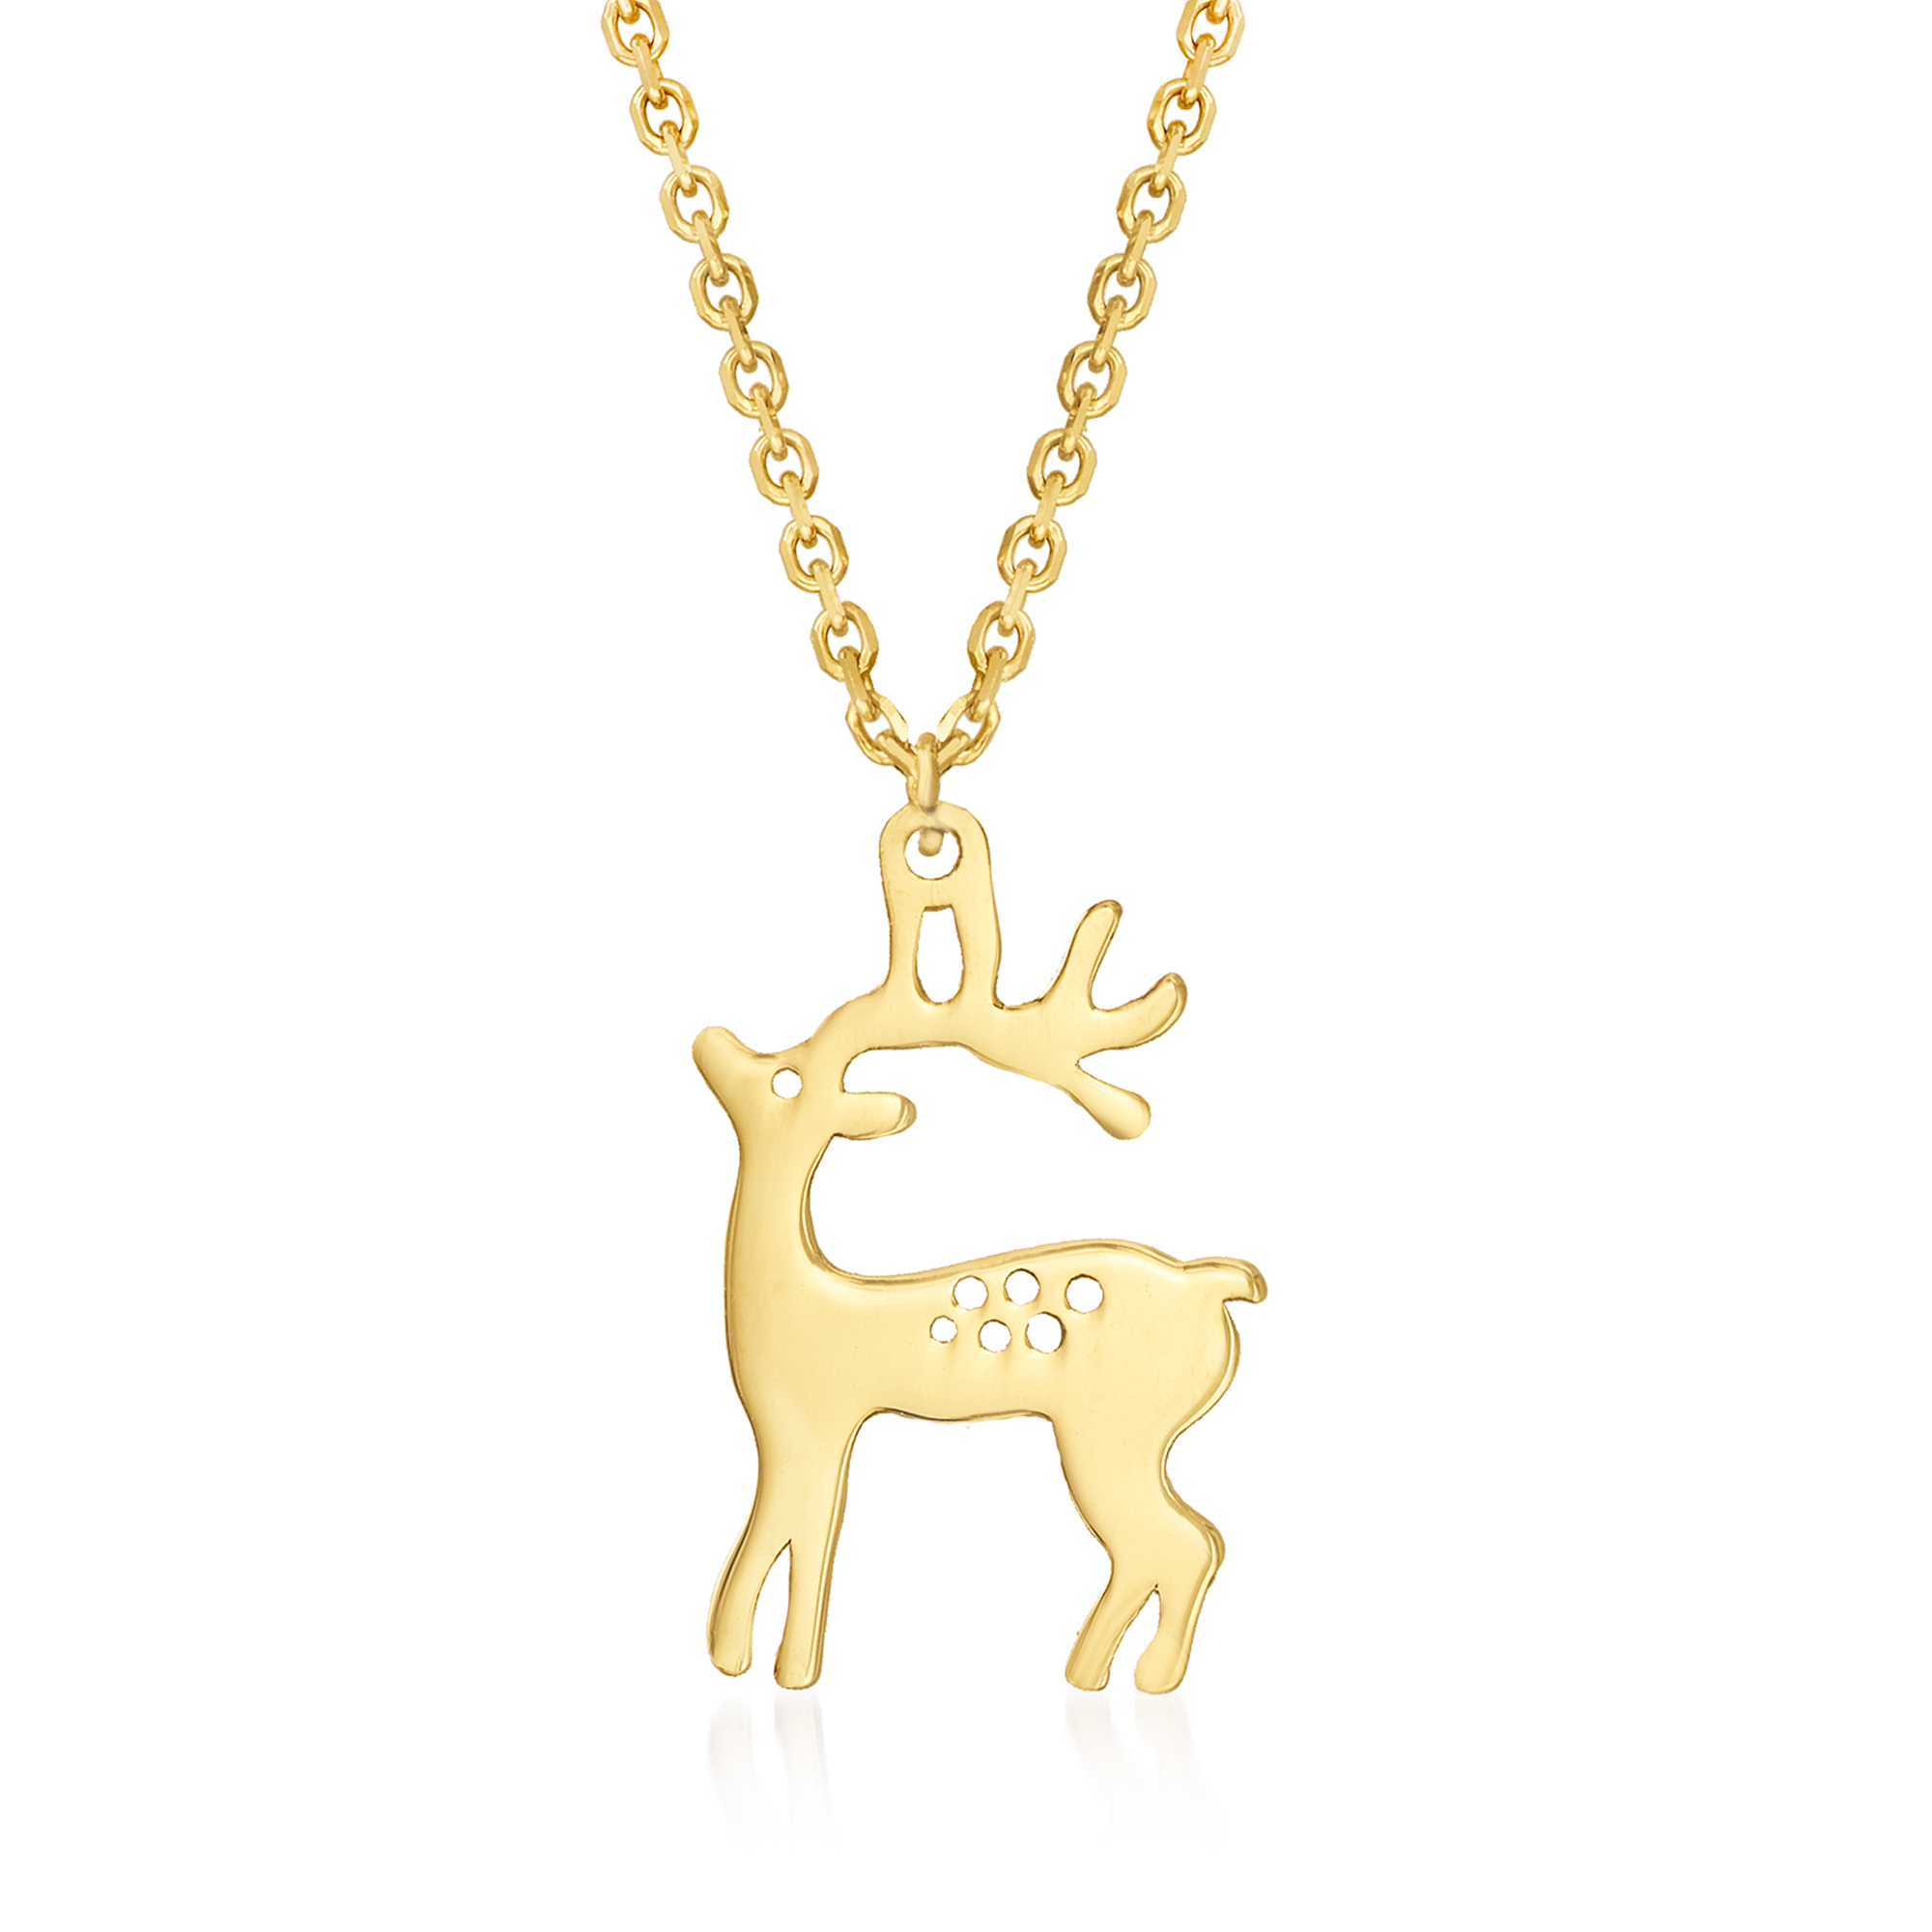 Christmas Reindeer Necklace Pendant Snowy Christmas Style Jewelry Gift for Her